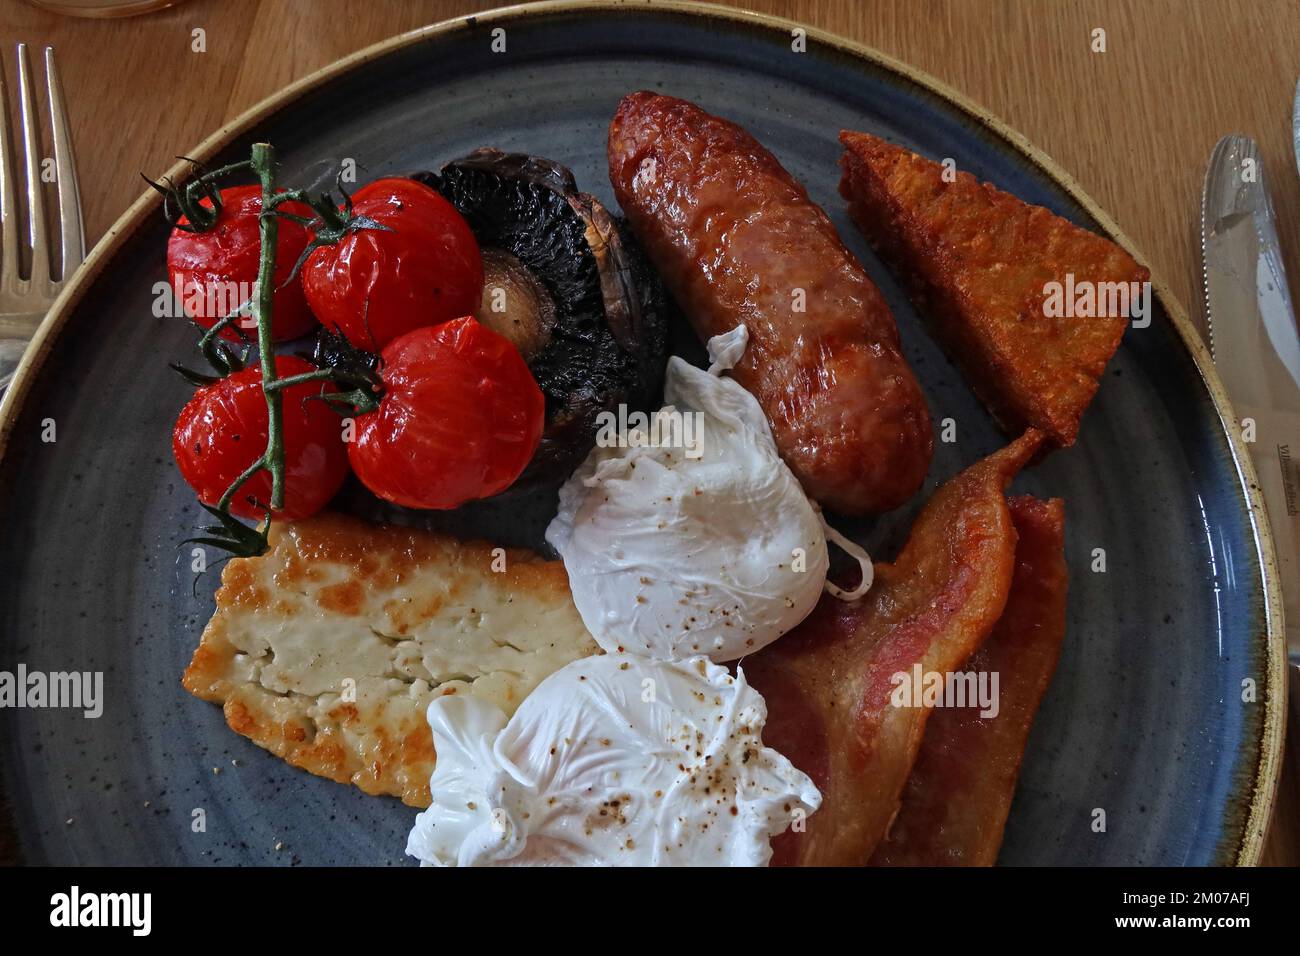 Quality hot cooked British breakfast, poached eggs, halloumi, bacon, sausages, hash-brown, fried on the vine tomatoes and mushroom Stock Photo